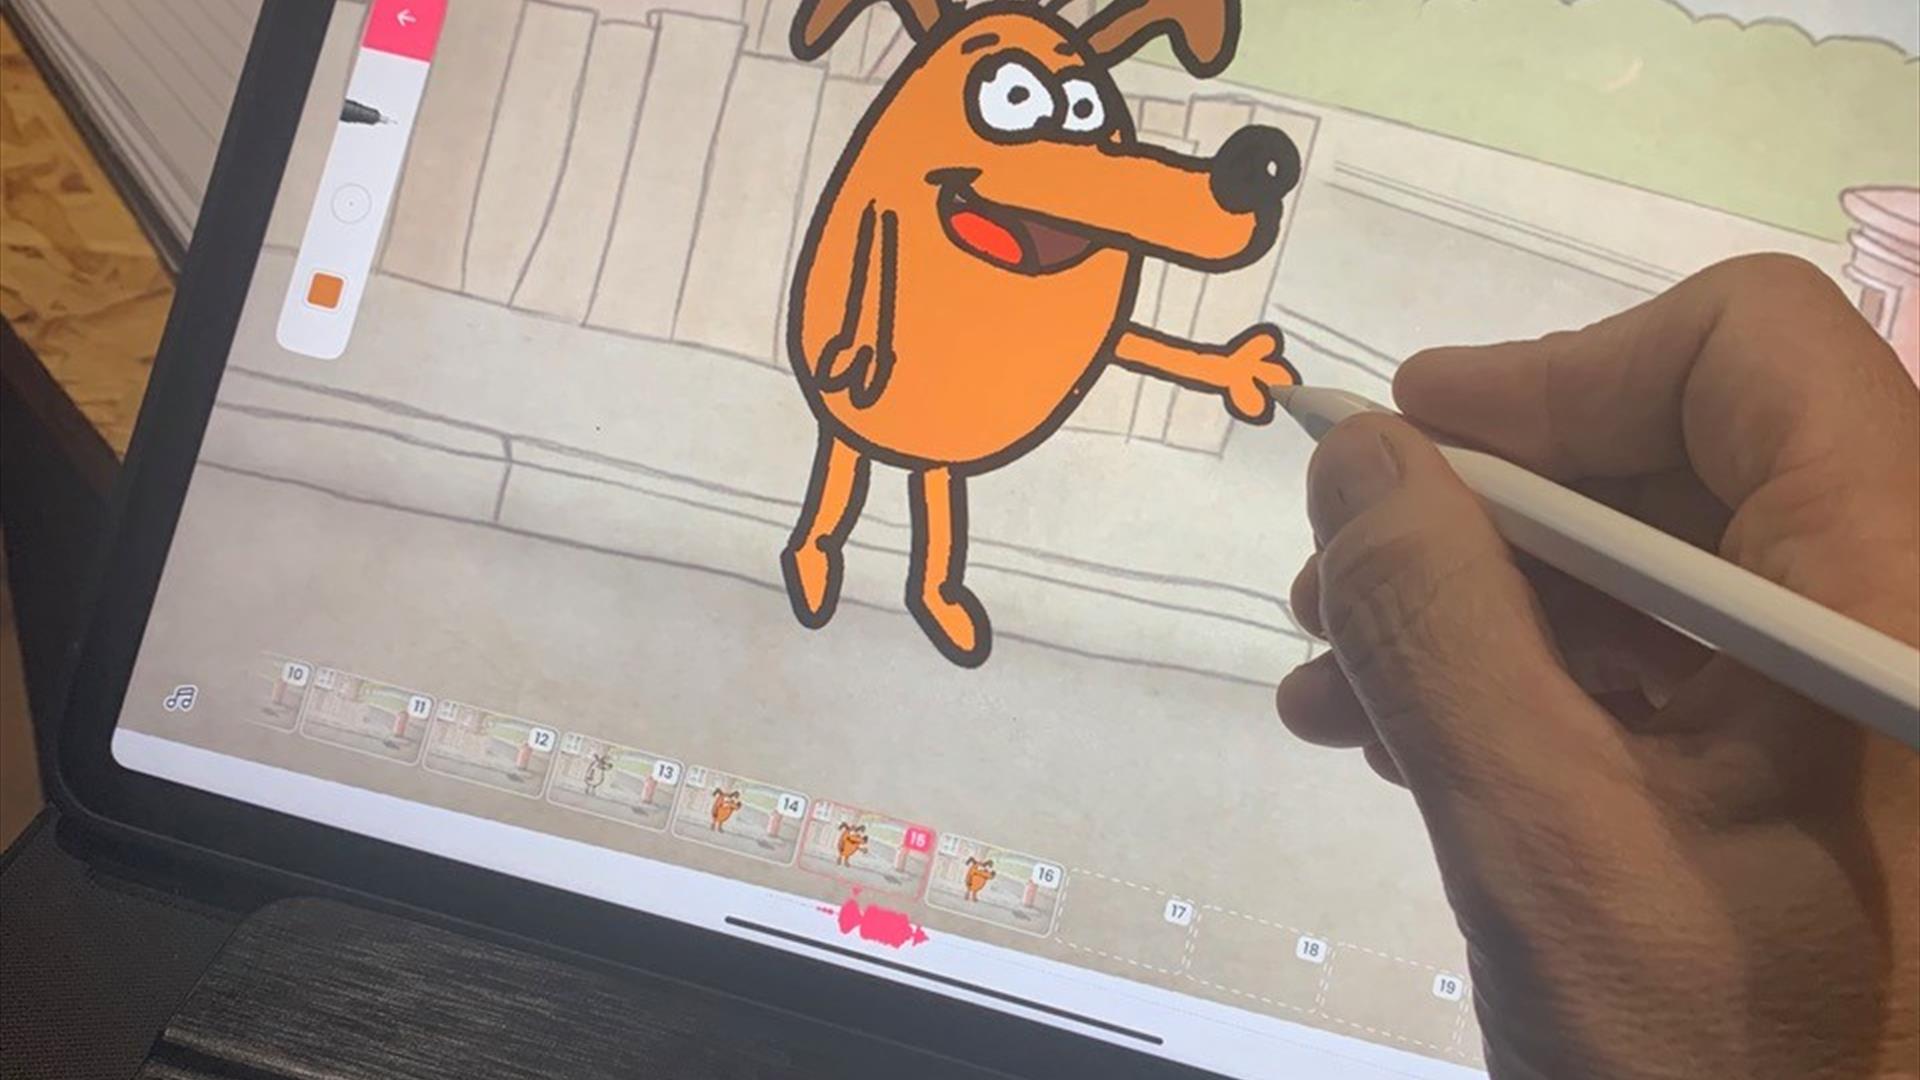 Image shows a hand drawing a cartoon dog on a computer screen